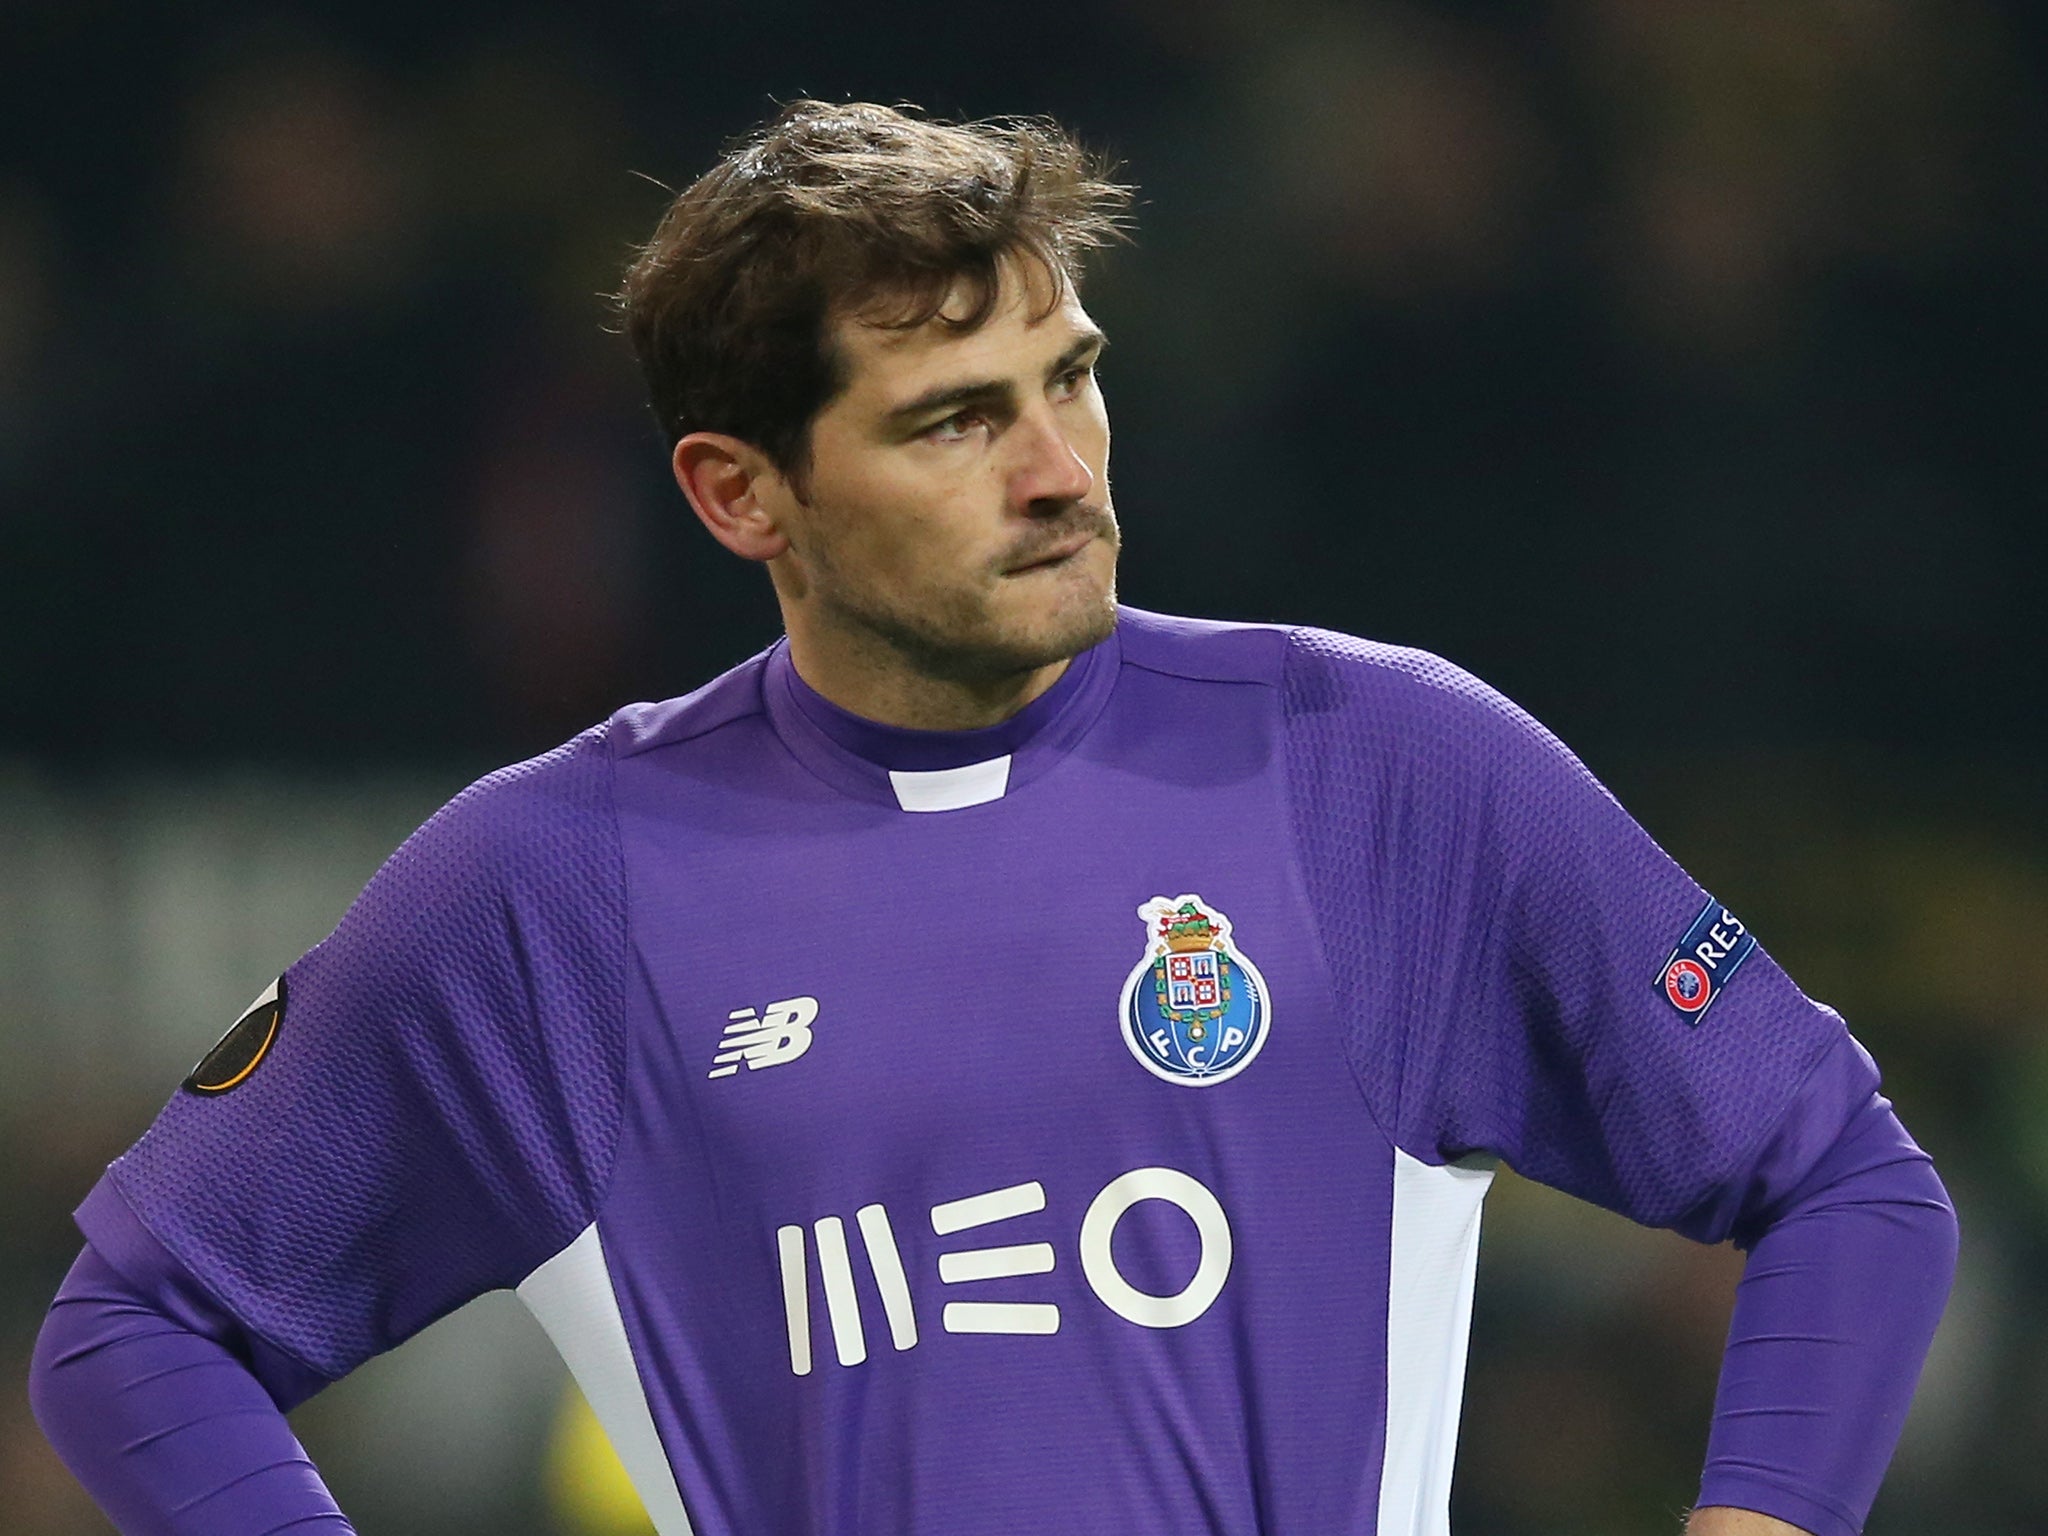 Casillas' comment has attracted criticism on social media